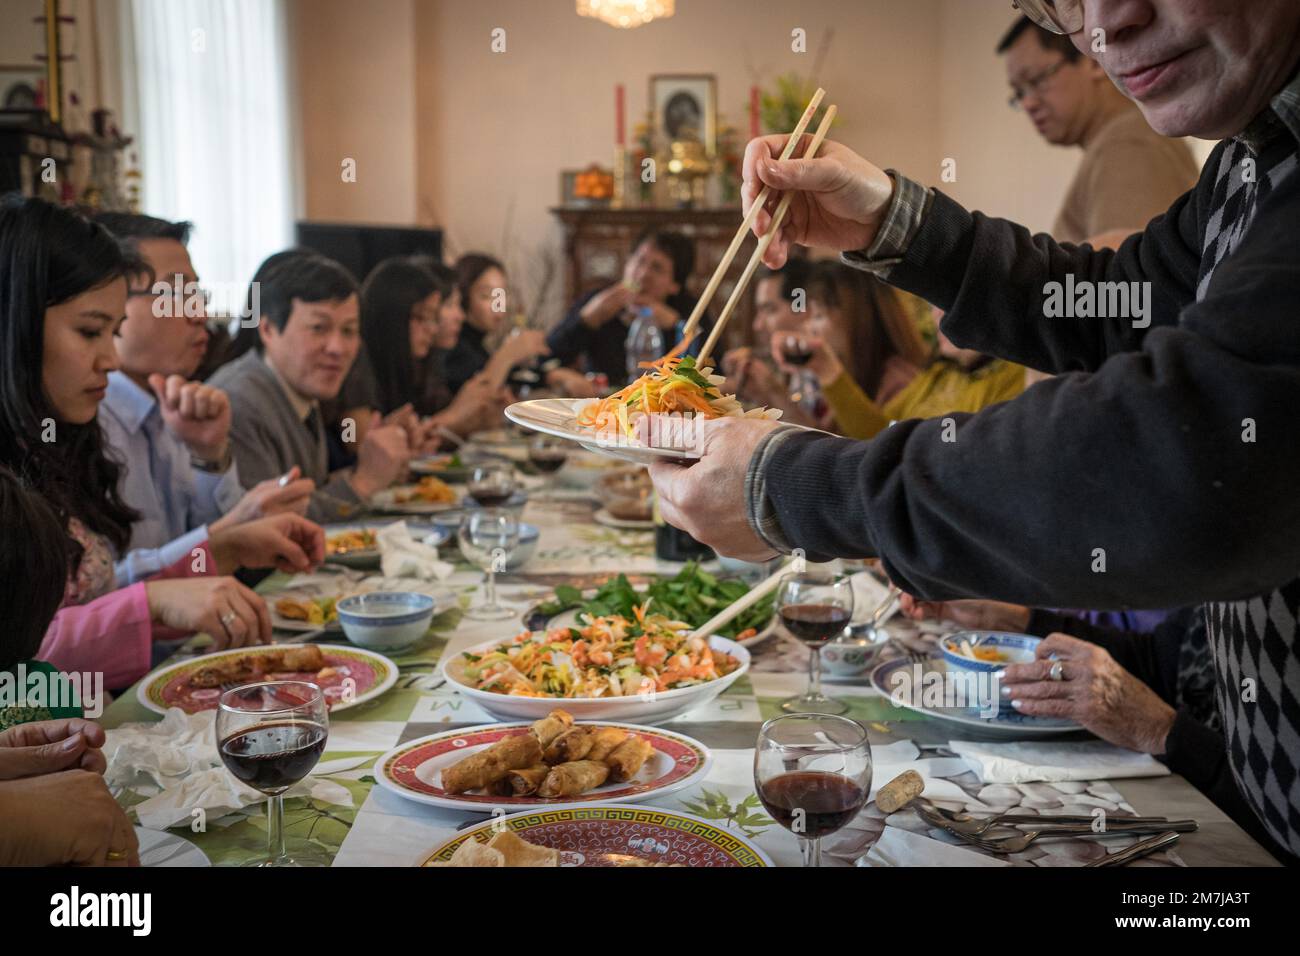 Olivier Donnars / Le Pictorium -  Tet, Vietnamese New Year -  7/2/2016  -  France / Ile-de-France (region)  -  Family and friends meal at Mr. and Mrs. Stock Photo